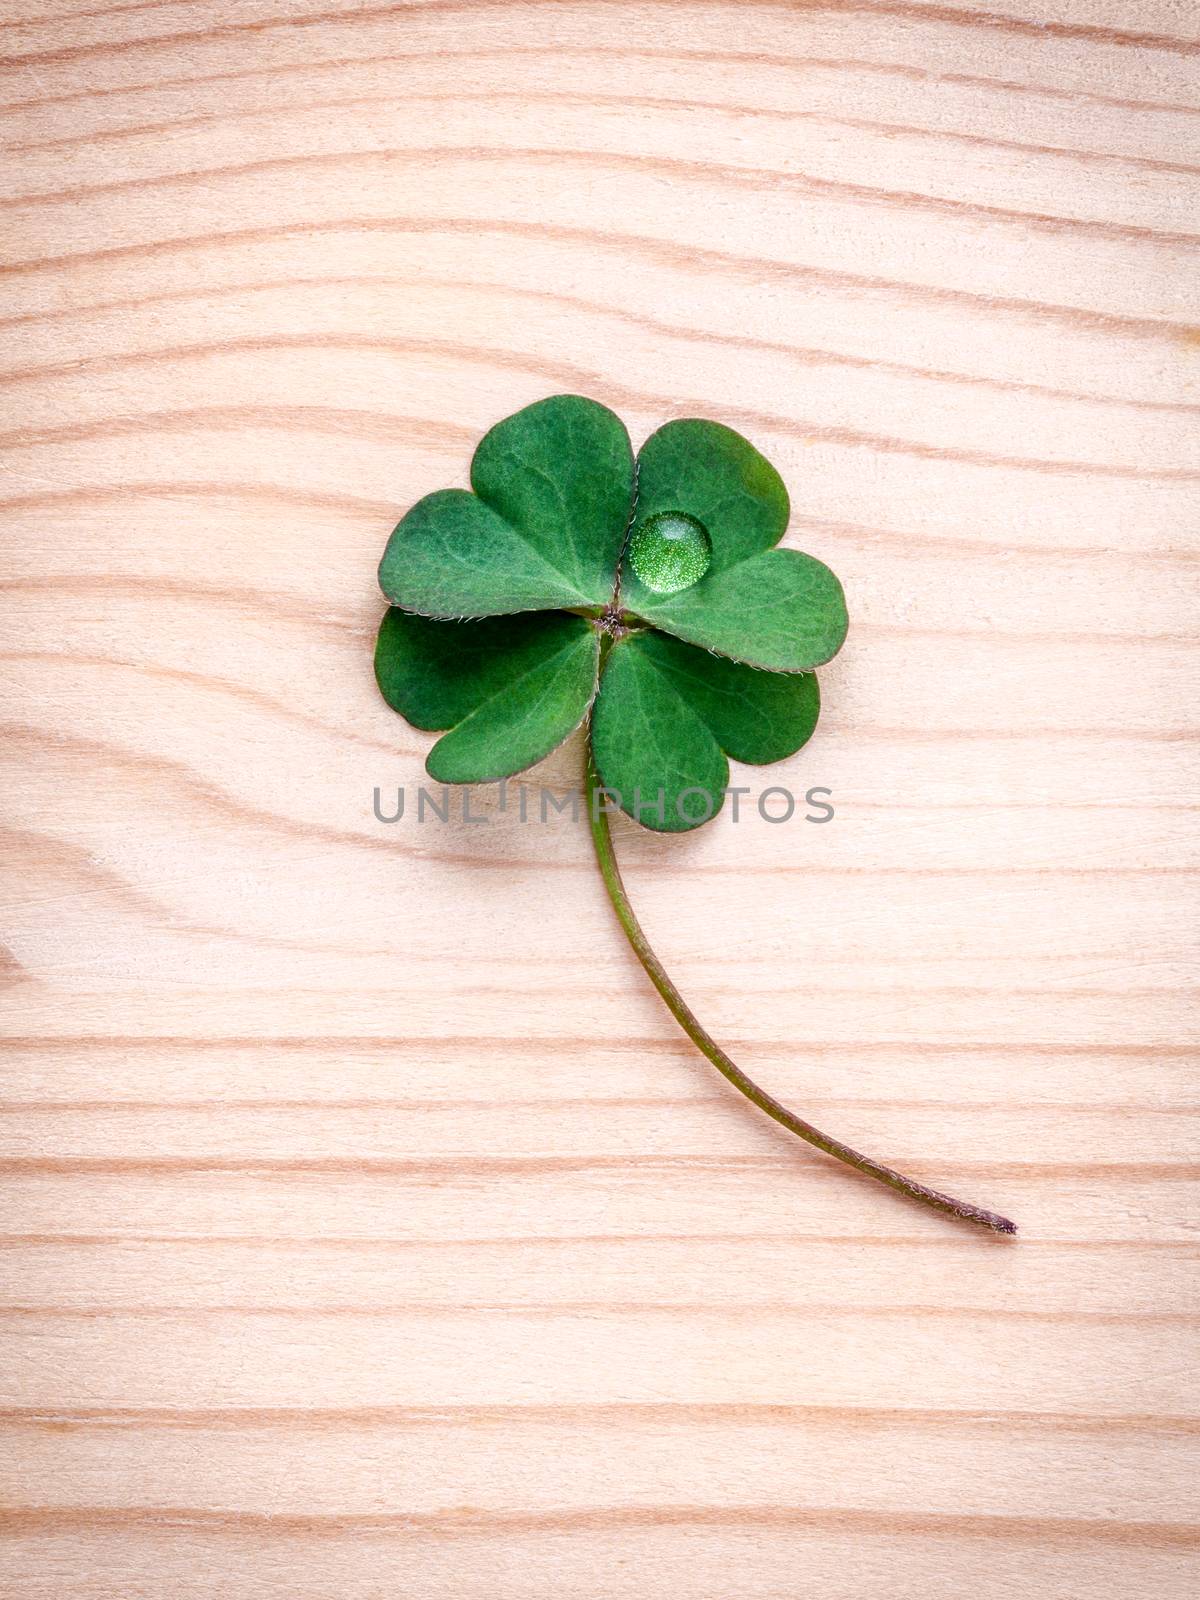 Clovers leaves on wooden background.The symbolic of Four Leaf Cl by kerdkanno